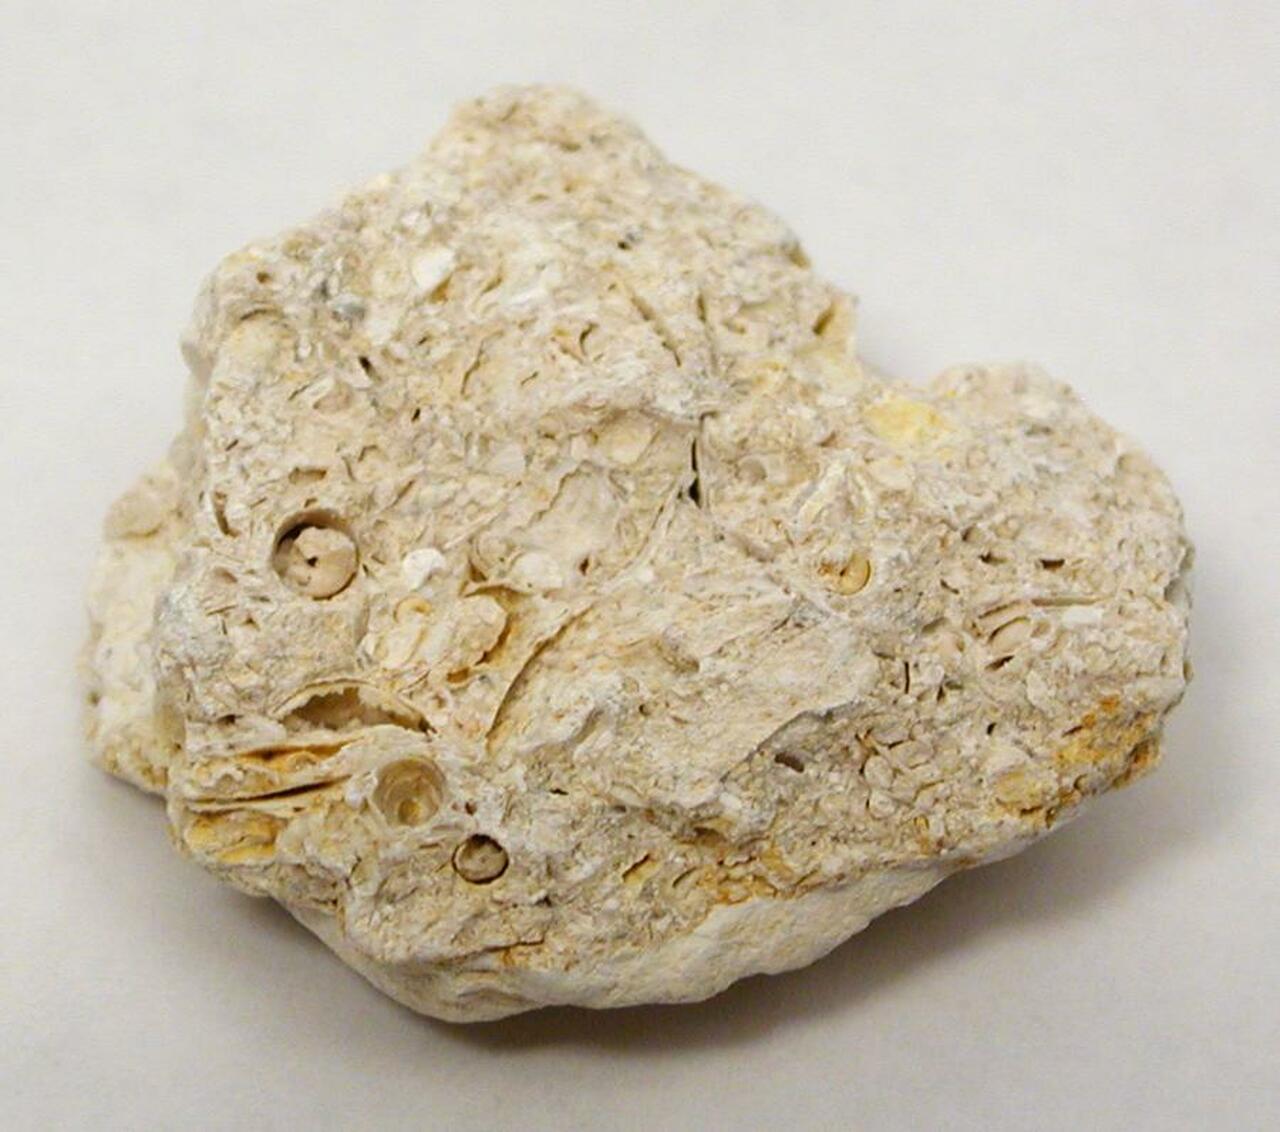 <p>What type of rock is Fossiliferous Limestone and which group is it in?</p>